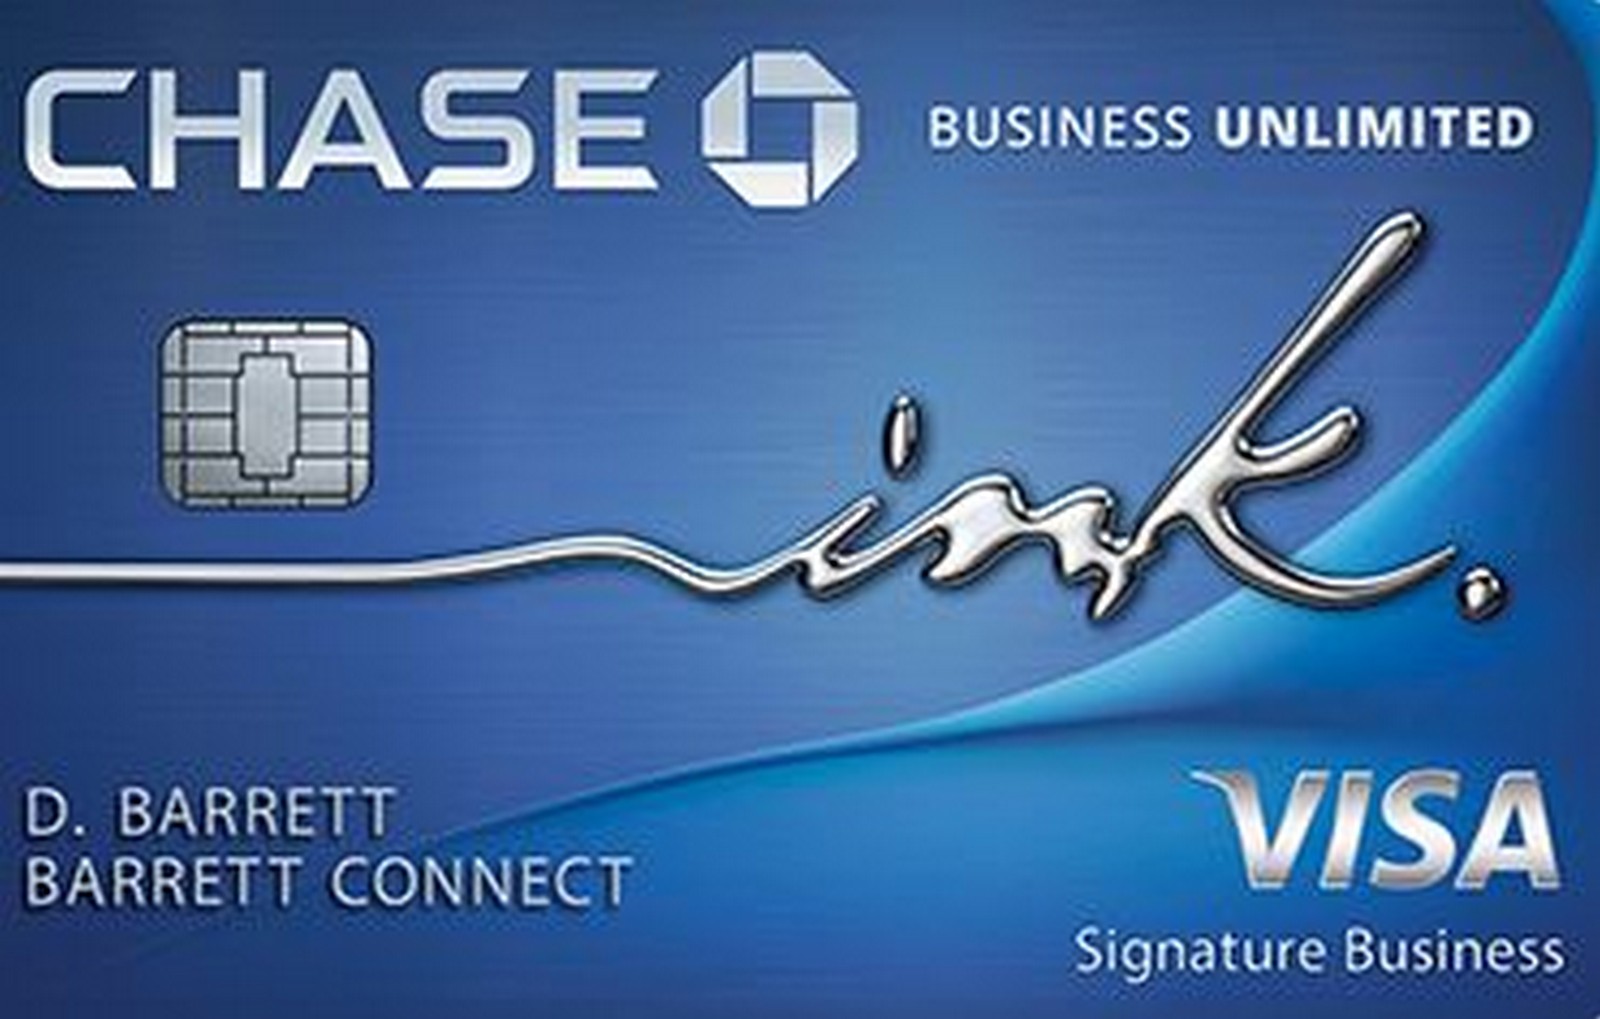 Chase Ink Business Unlimited Credit Score